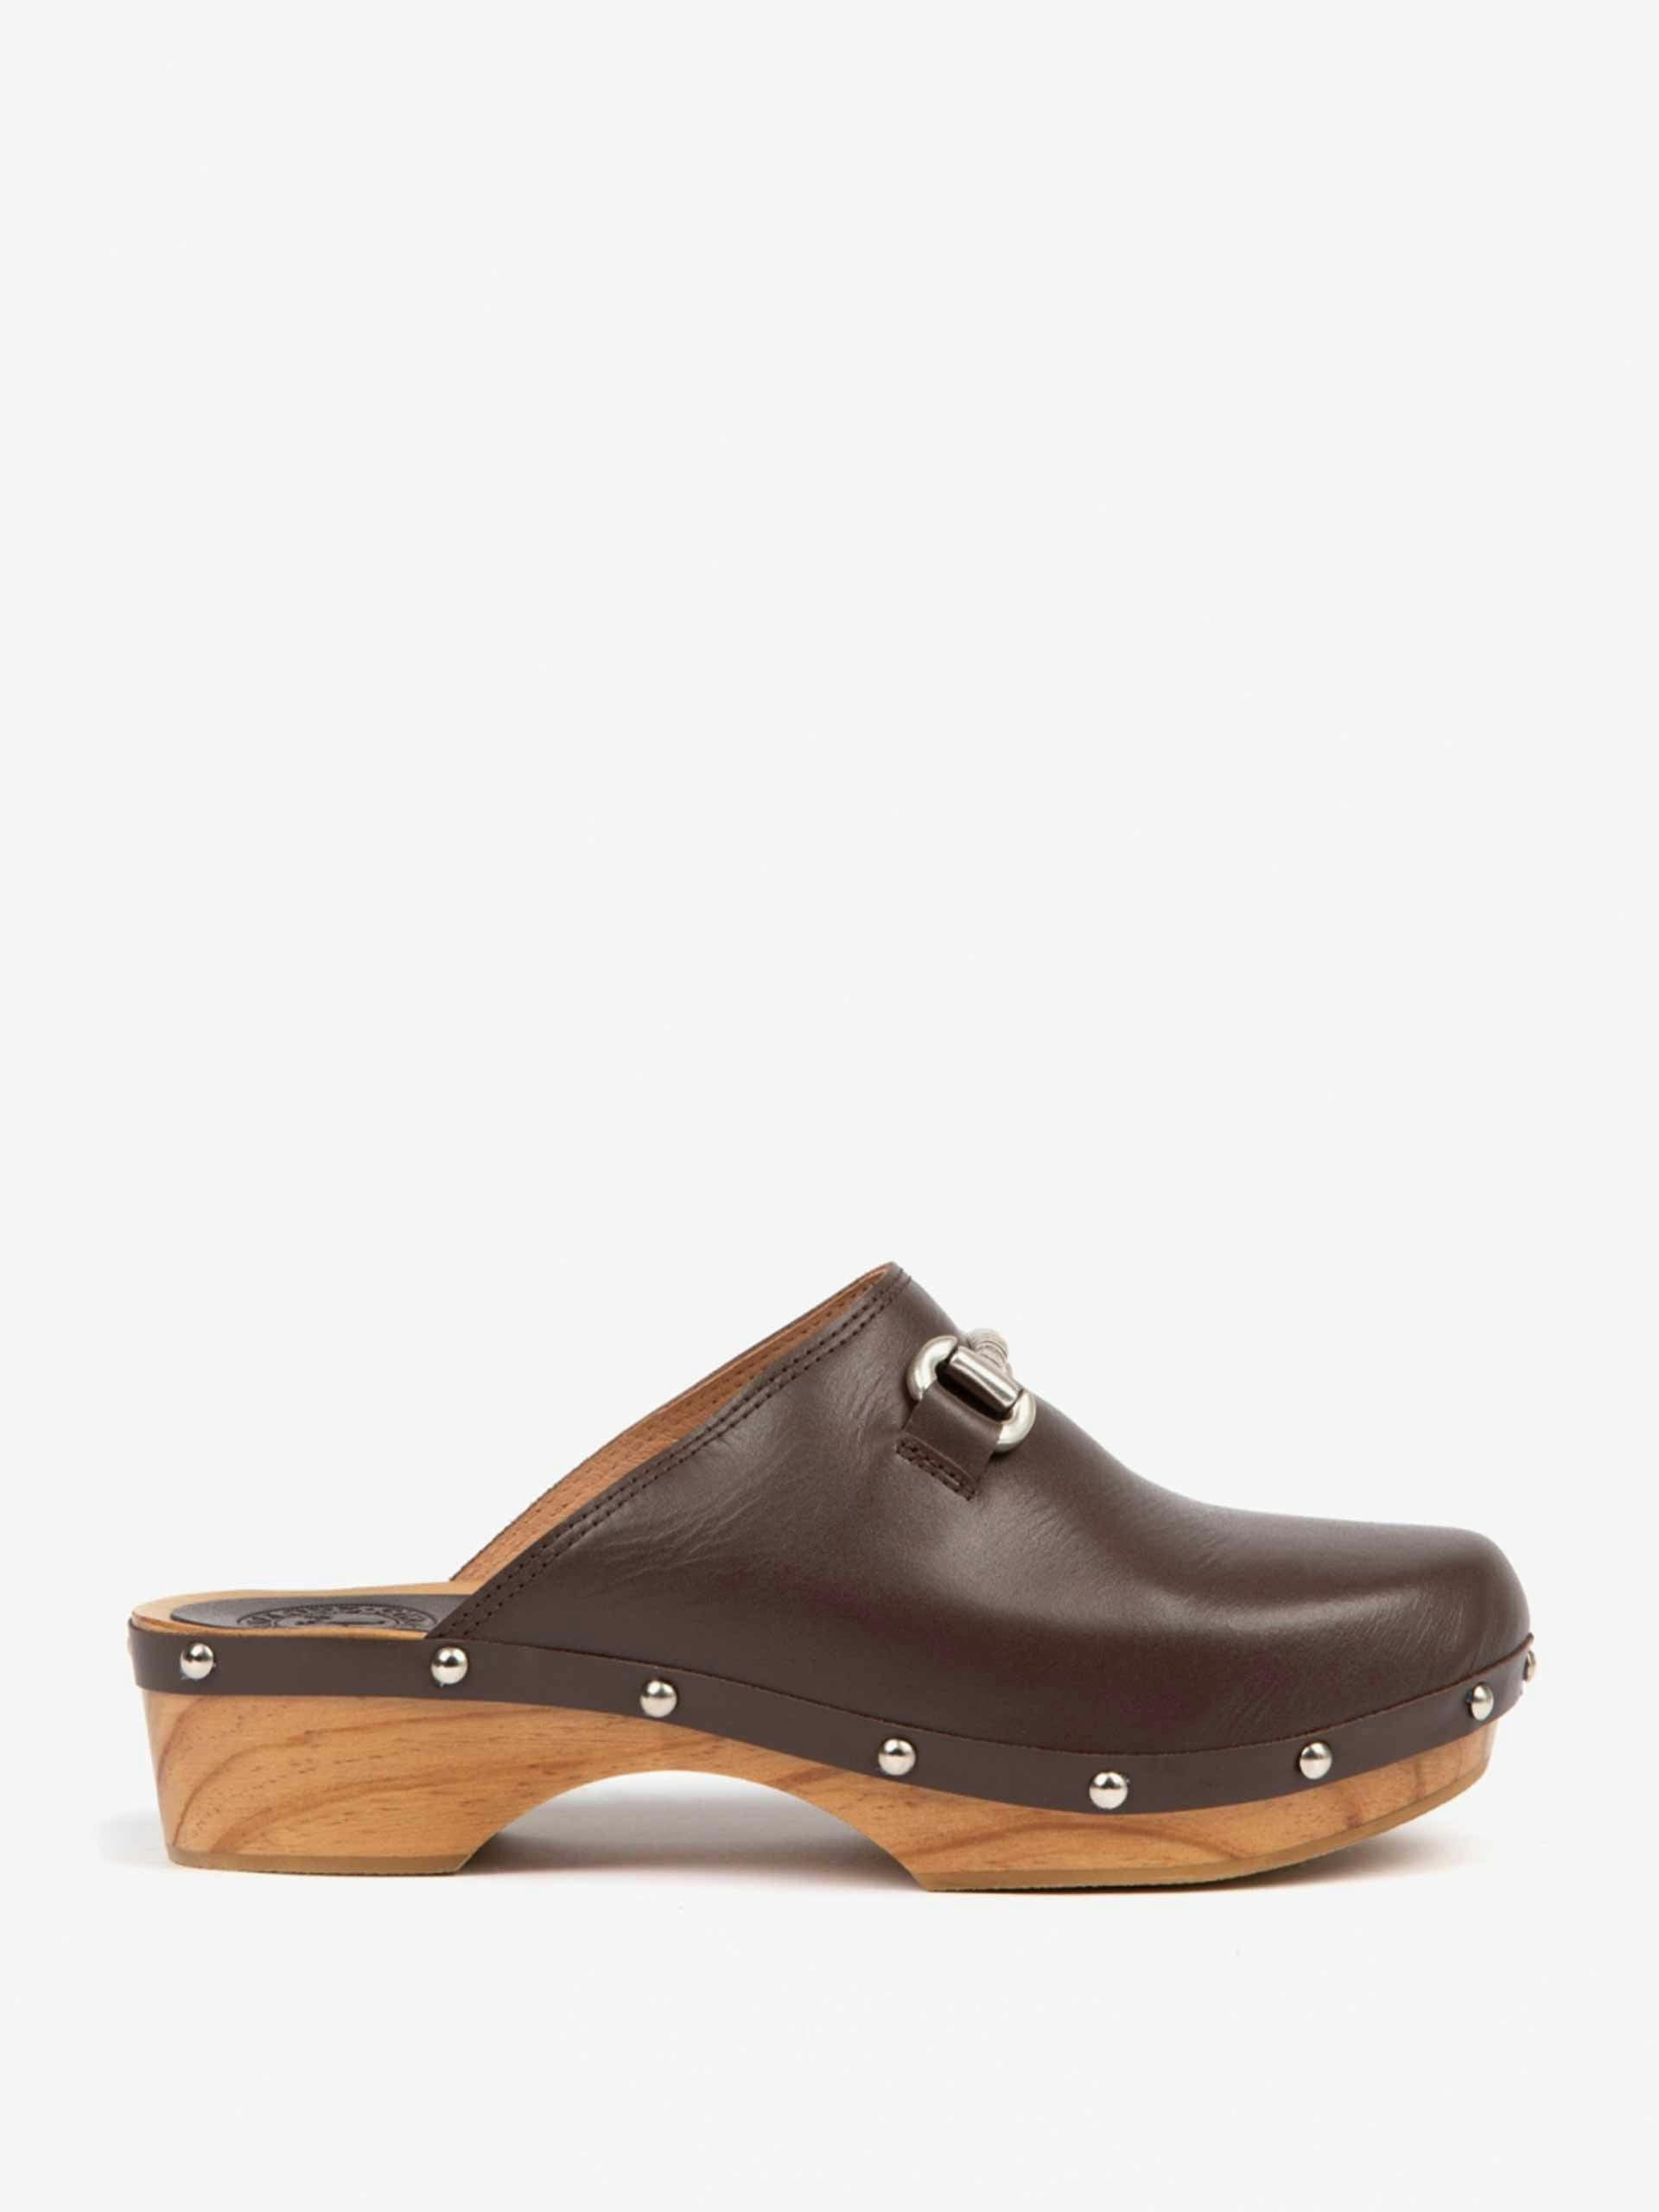 Leather clogs with a wooden sole